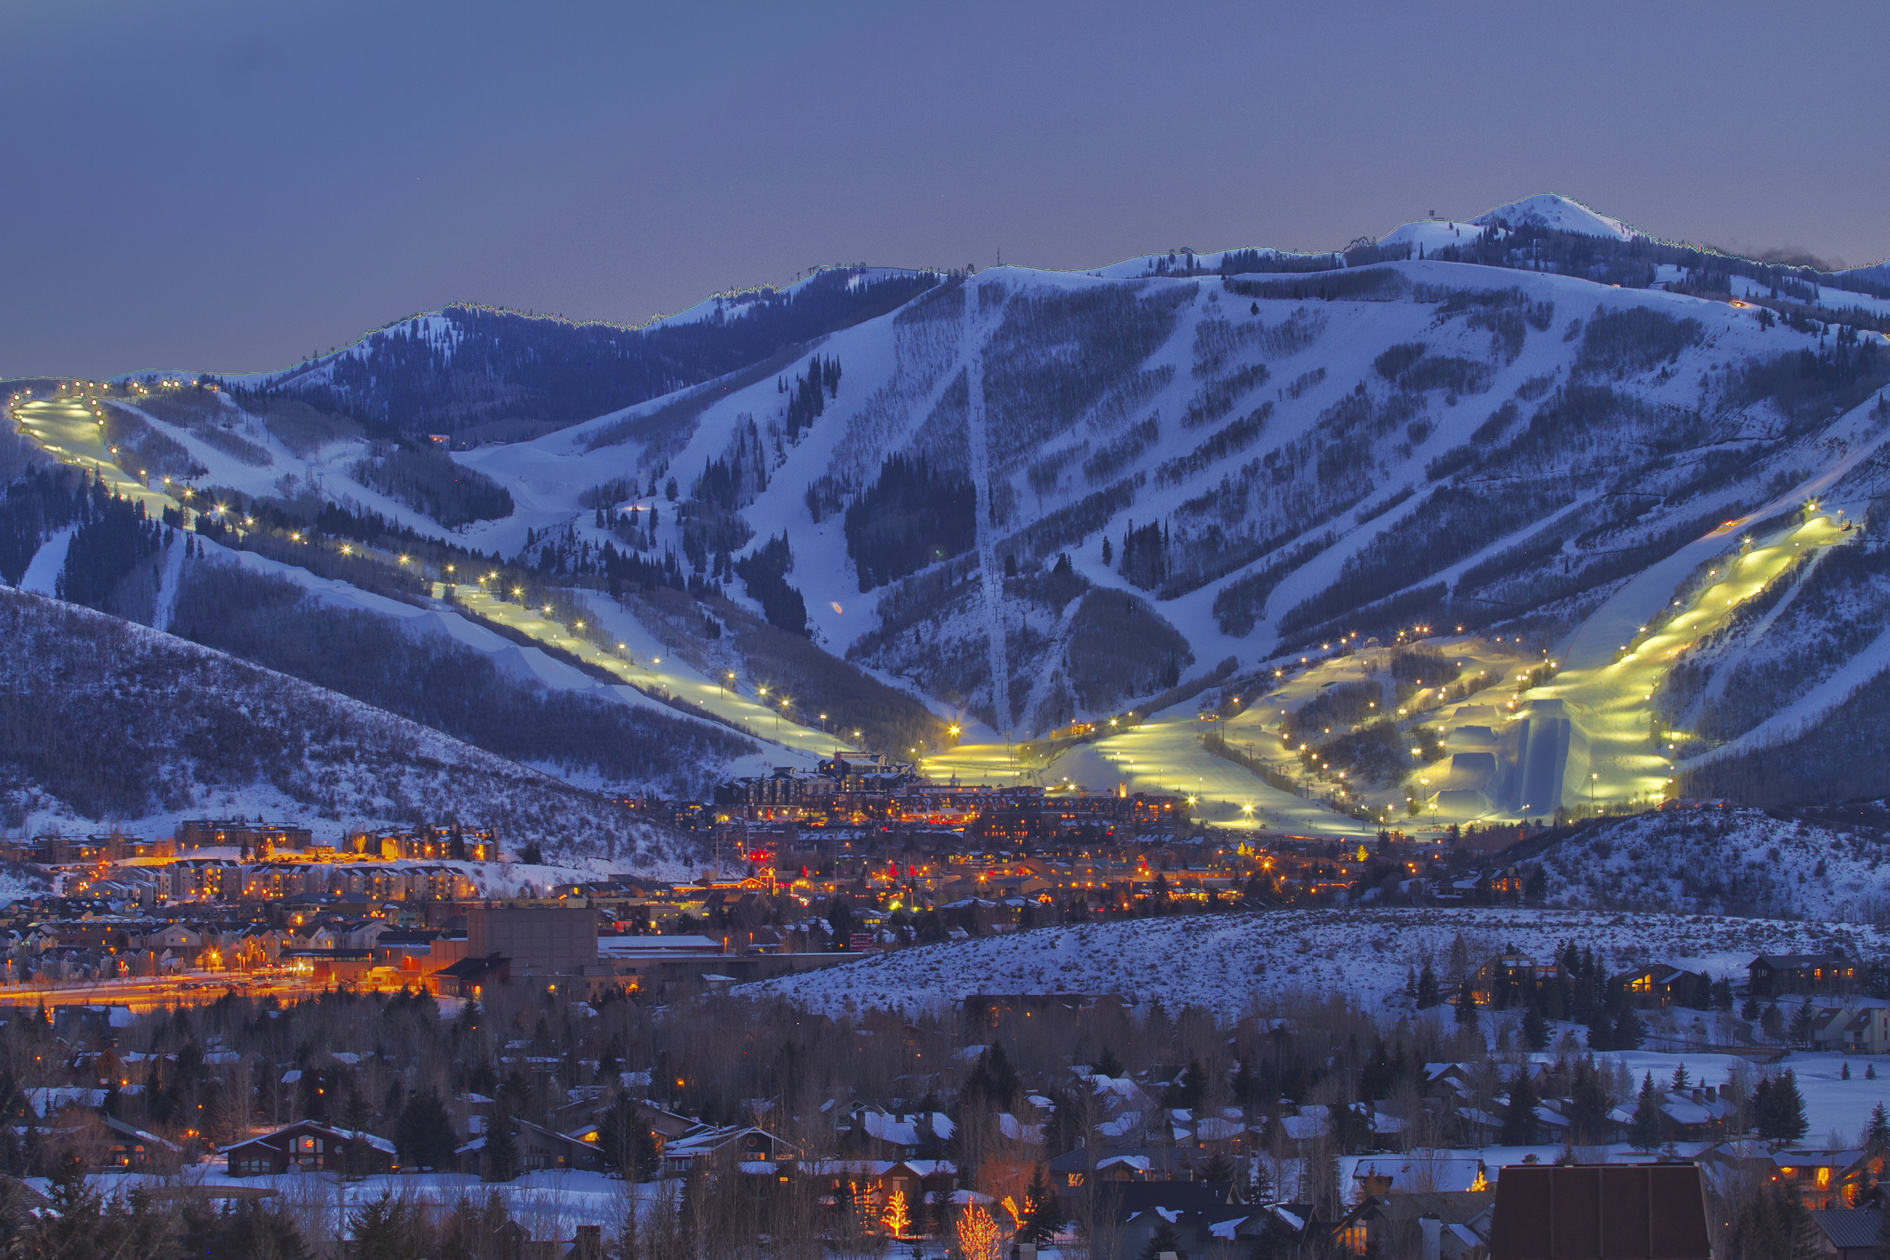 The mountain has it all! PC: Park City